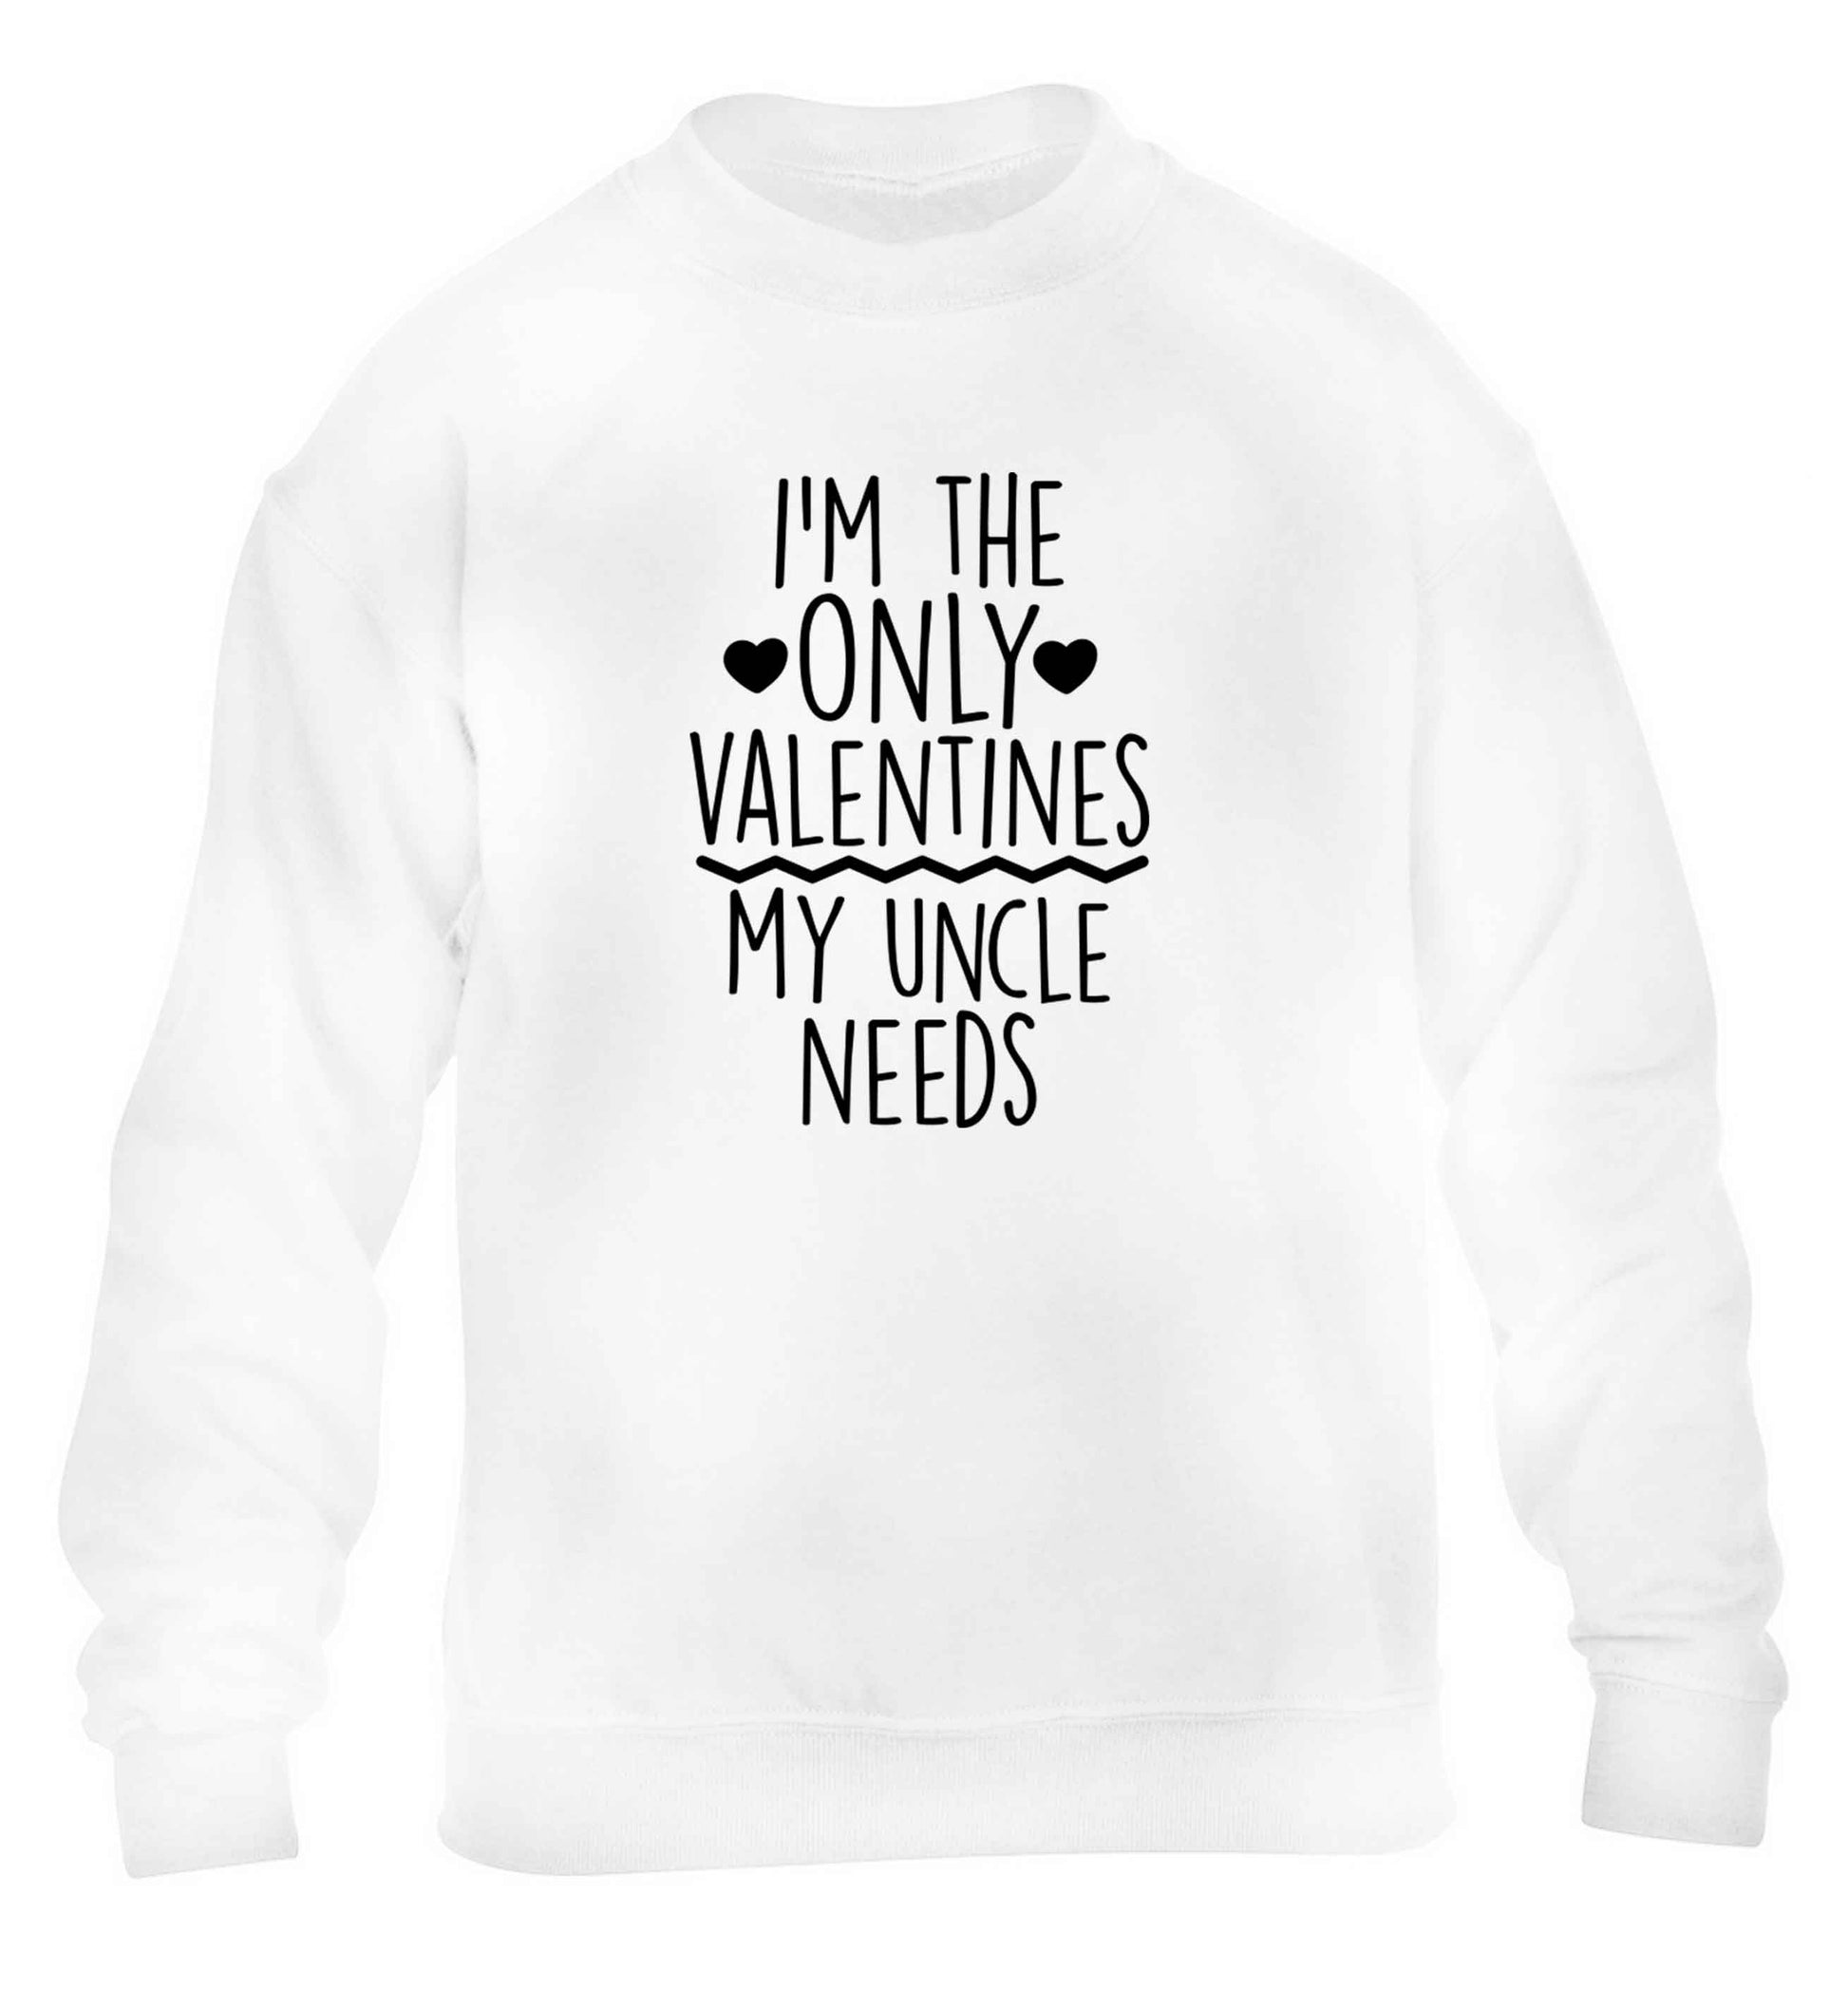 I'm the only valentines my uncle needs children's white sweater 12-13 Years